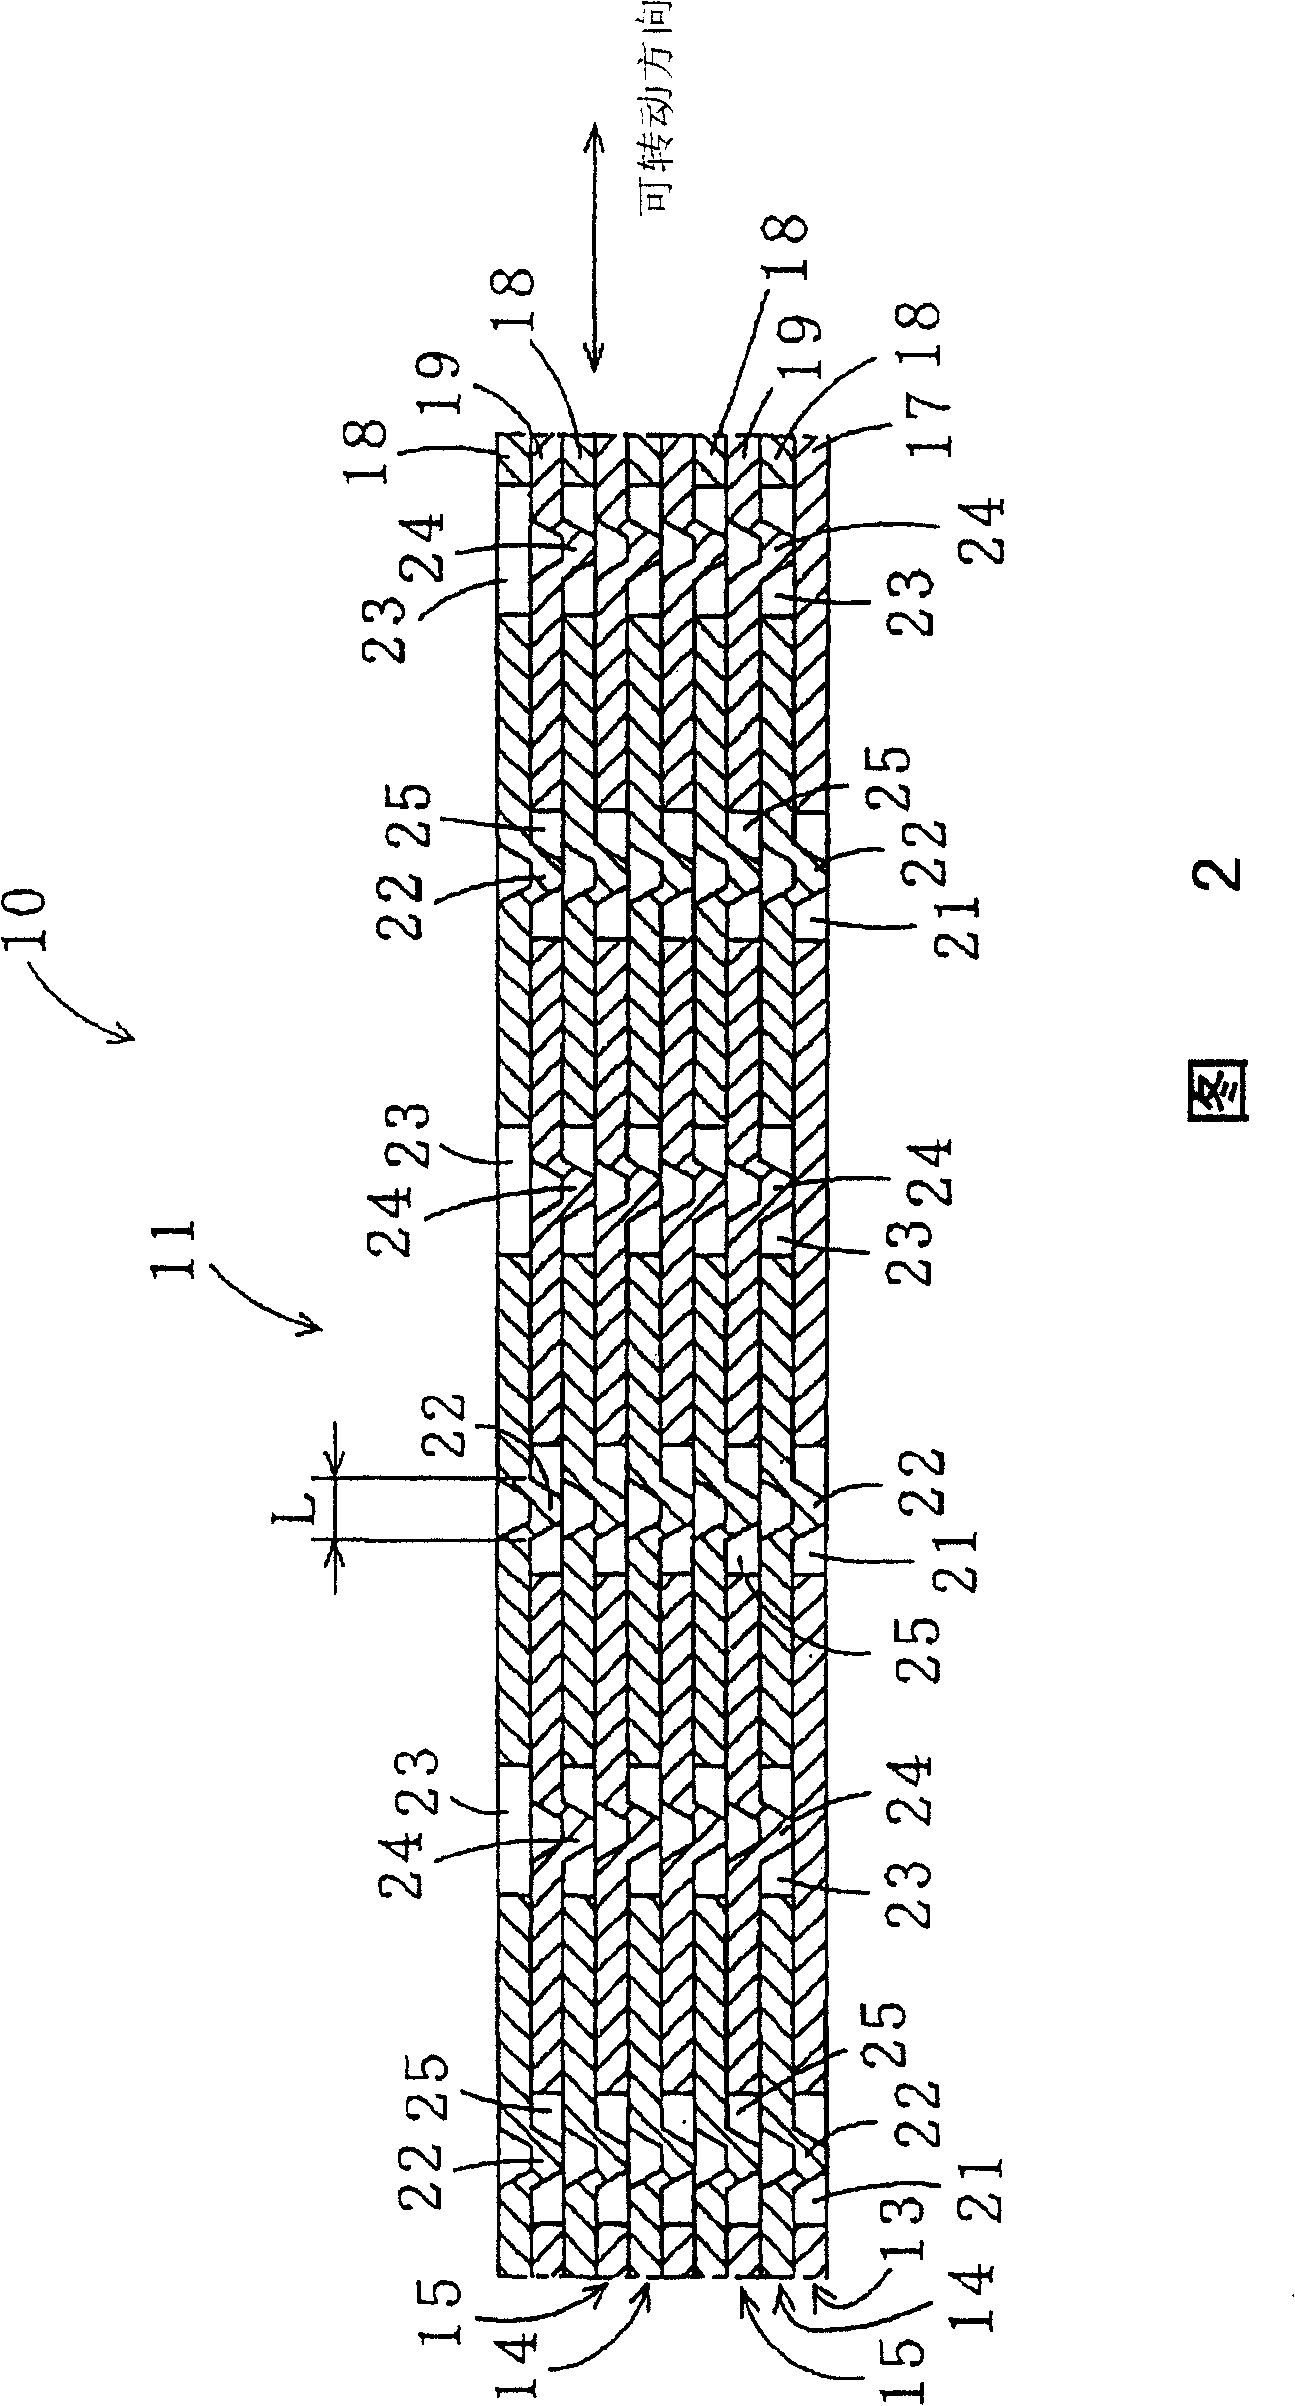 Skew shape variable laminated iron core and method of producing the same